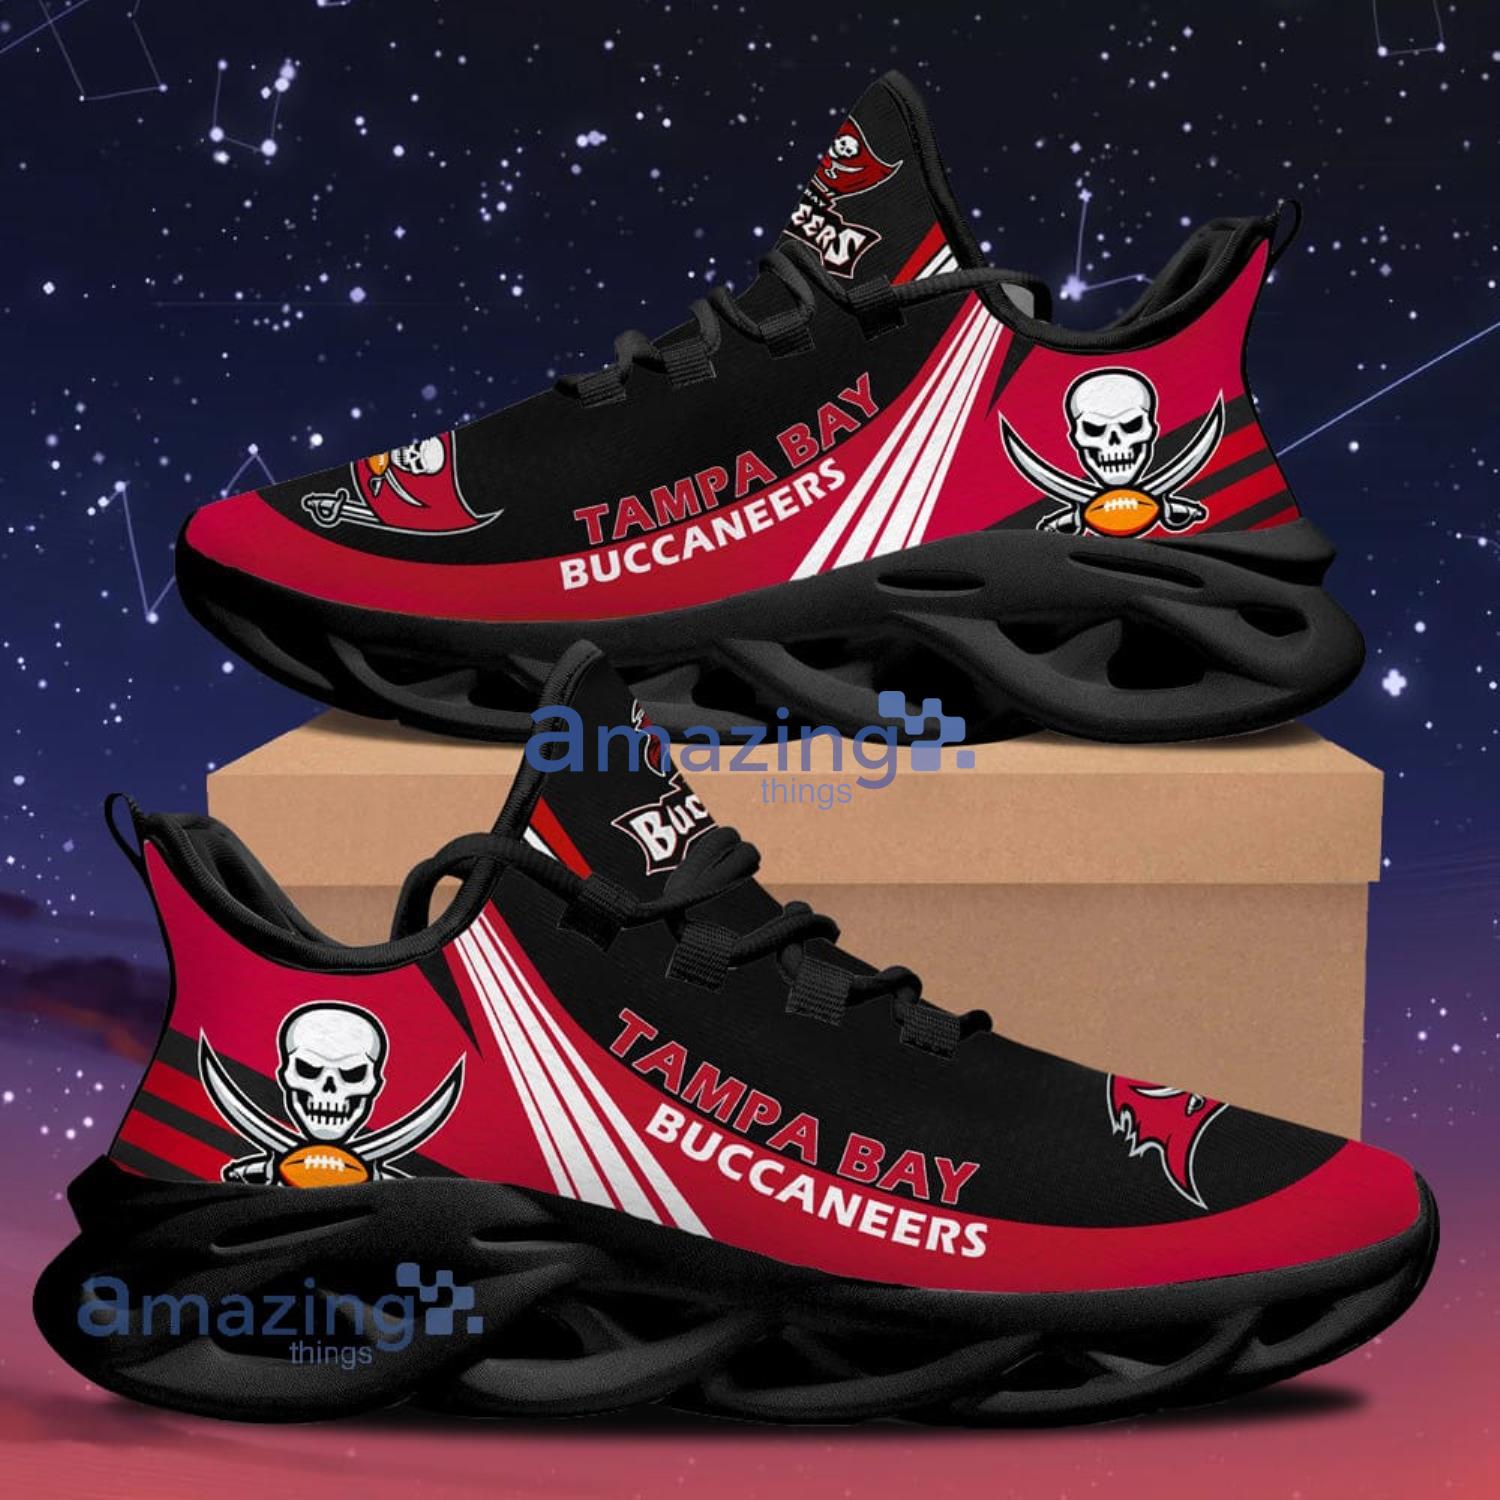 Tampa Bay Buccaneers New Trend Max Soul Shoes Running Sneakers Product Photo 1